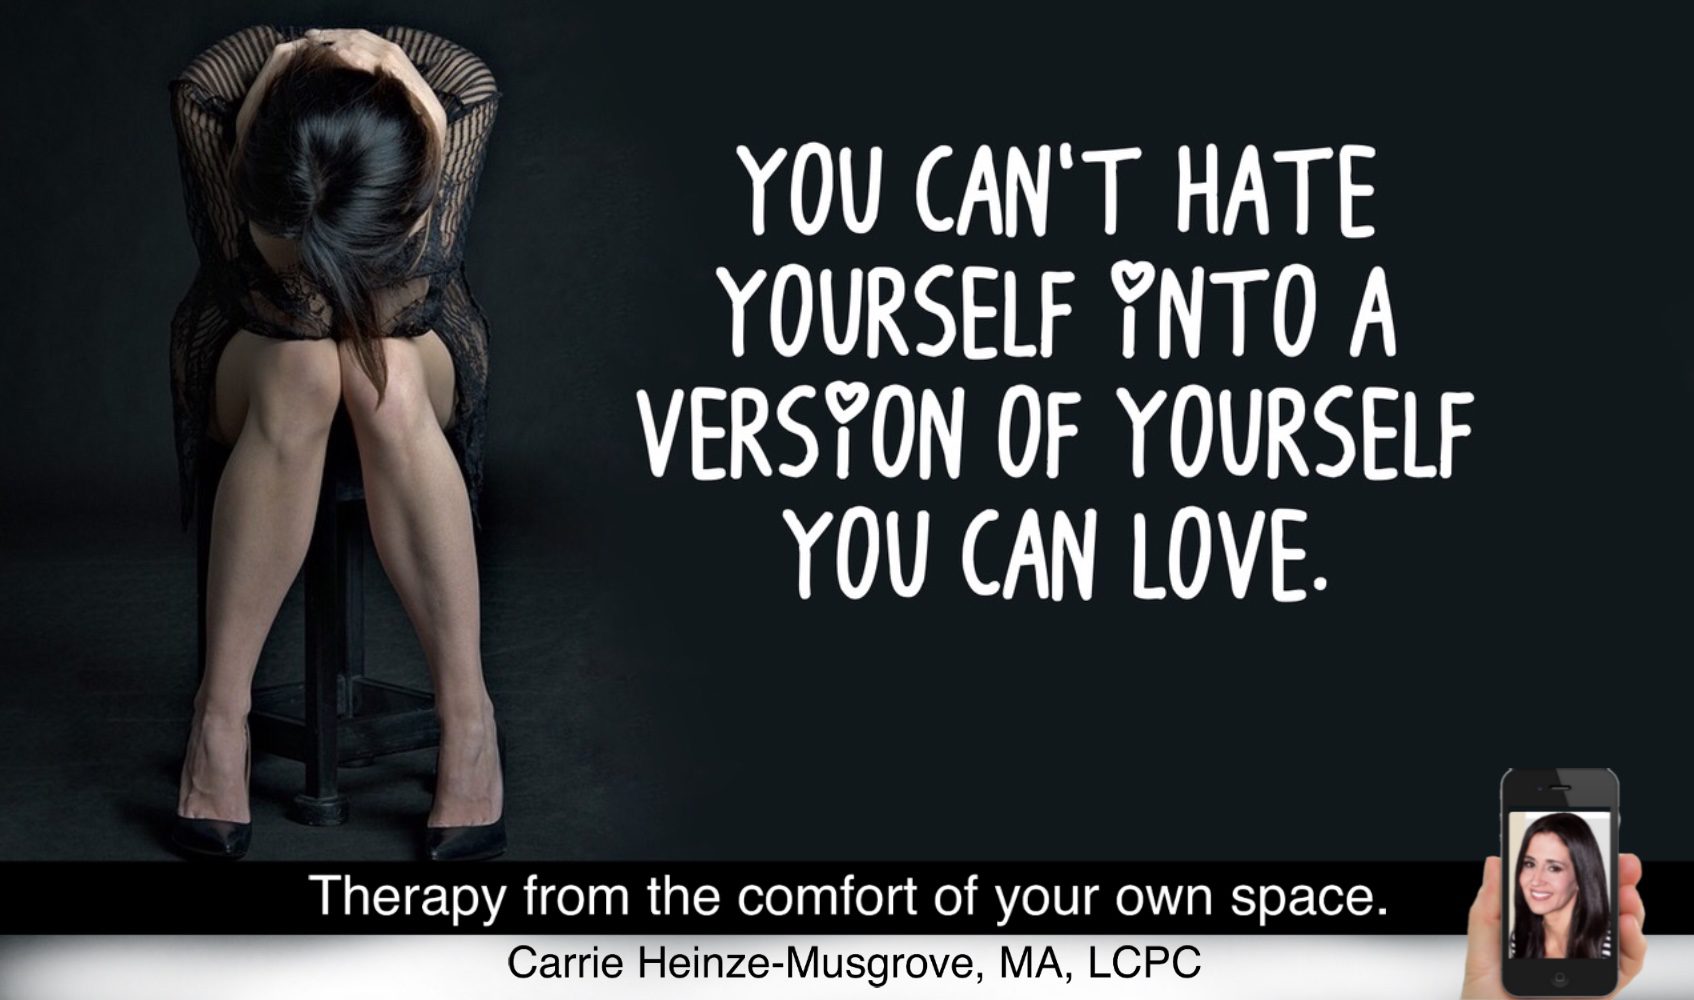 Can you hate yourself into a better you?